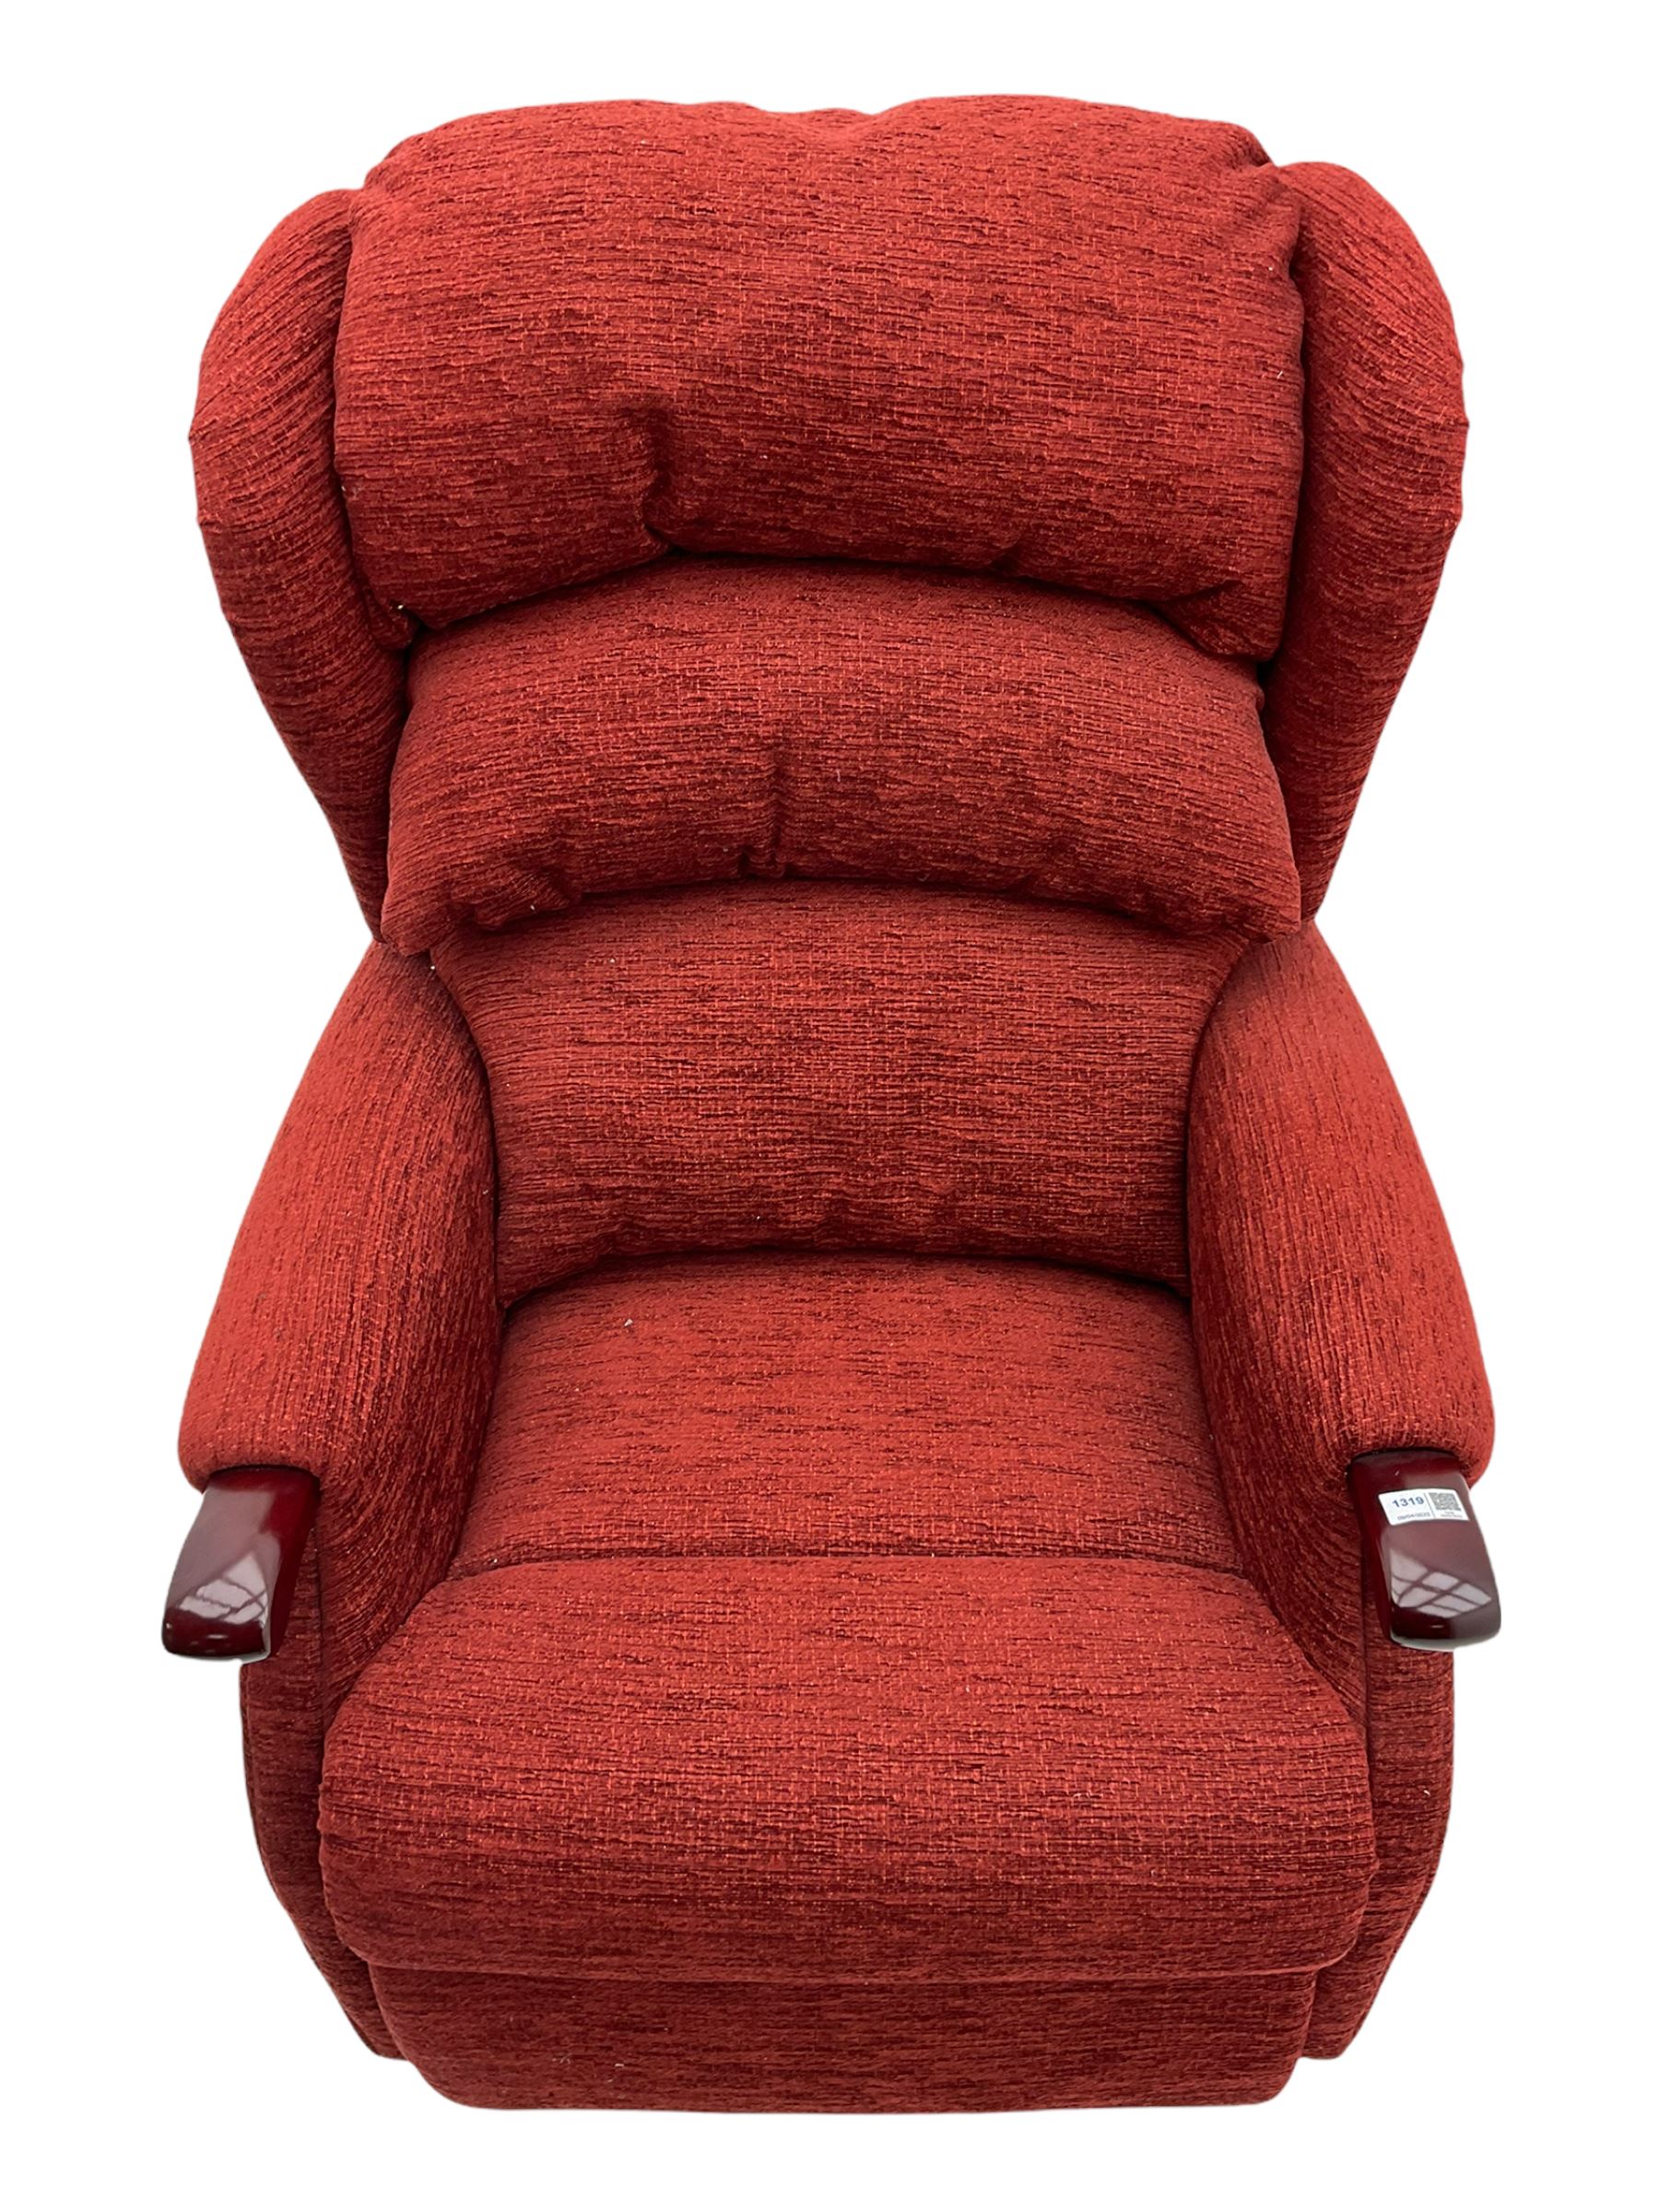 HSL electric reclining armchair - Image 2 of 5